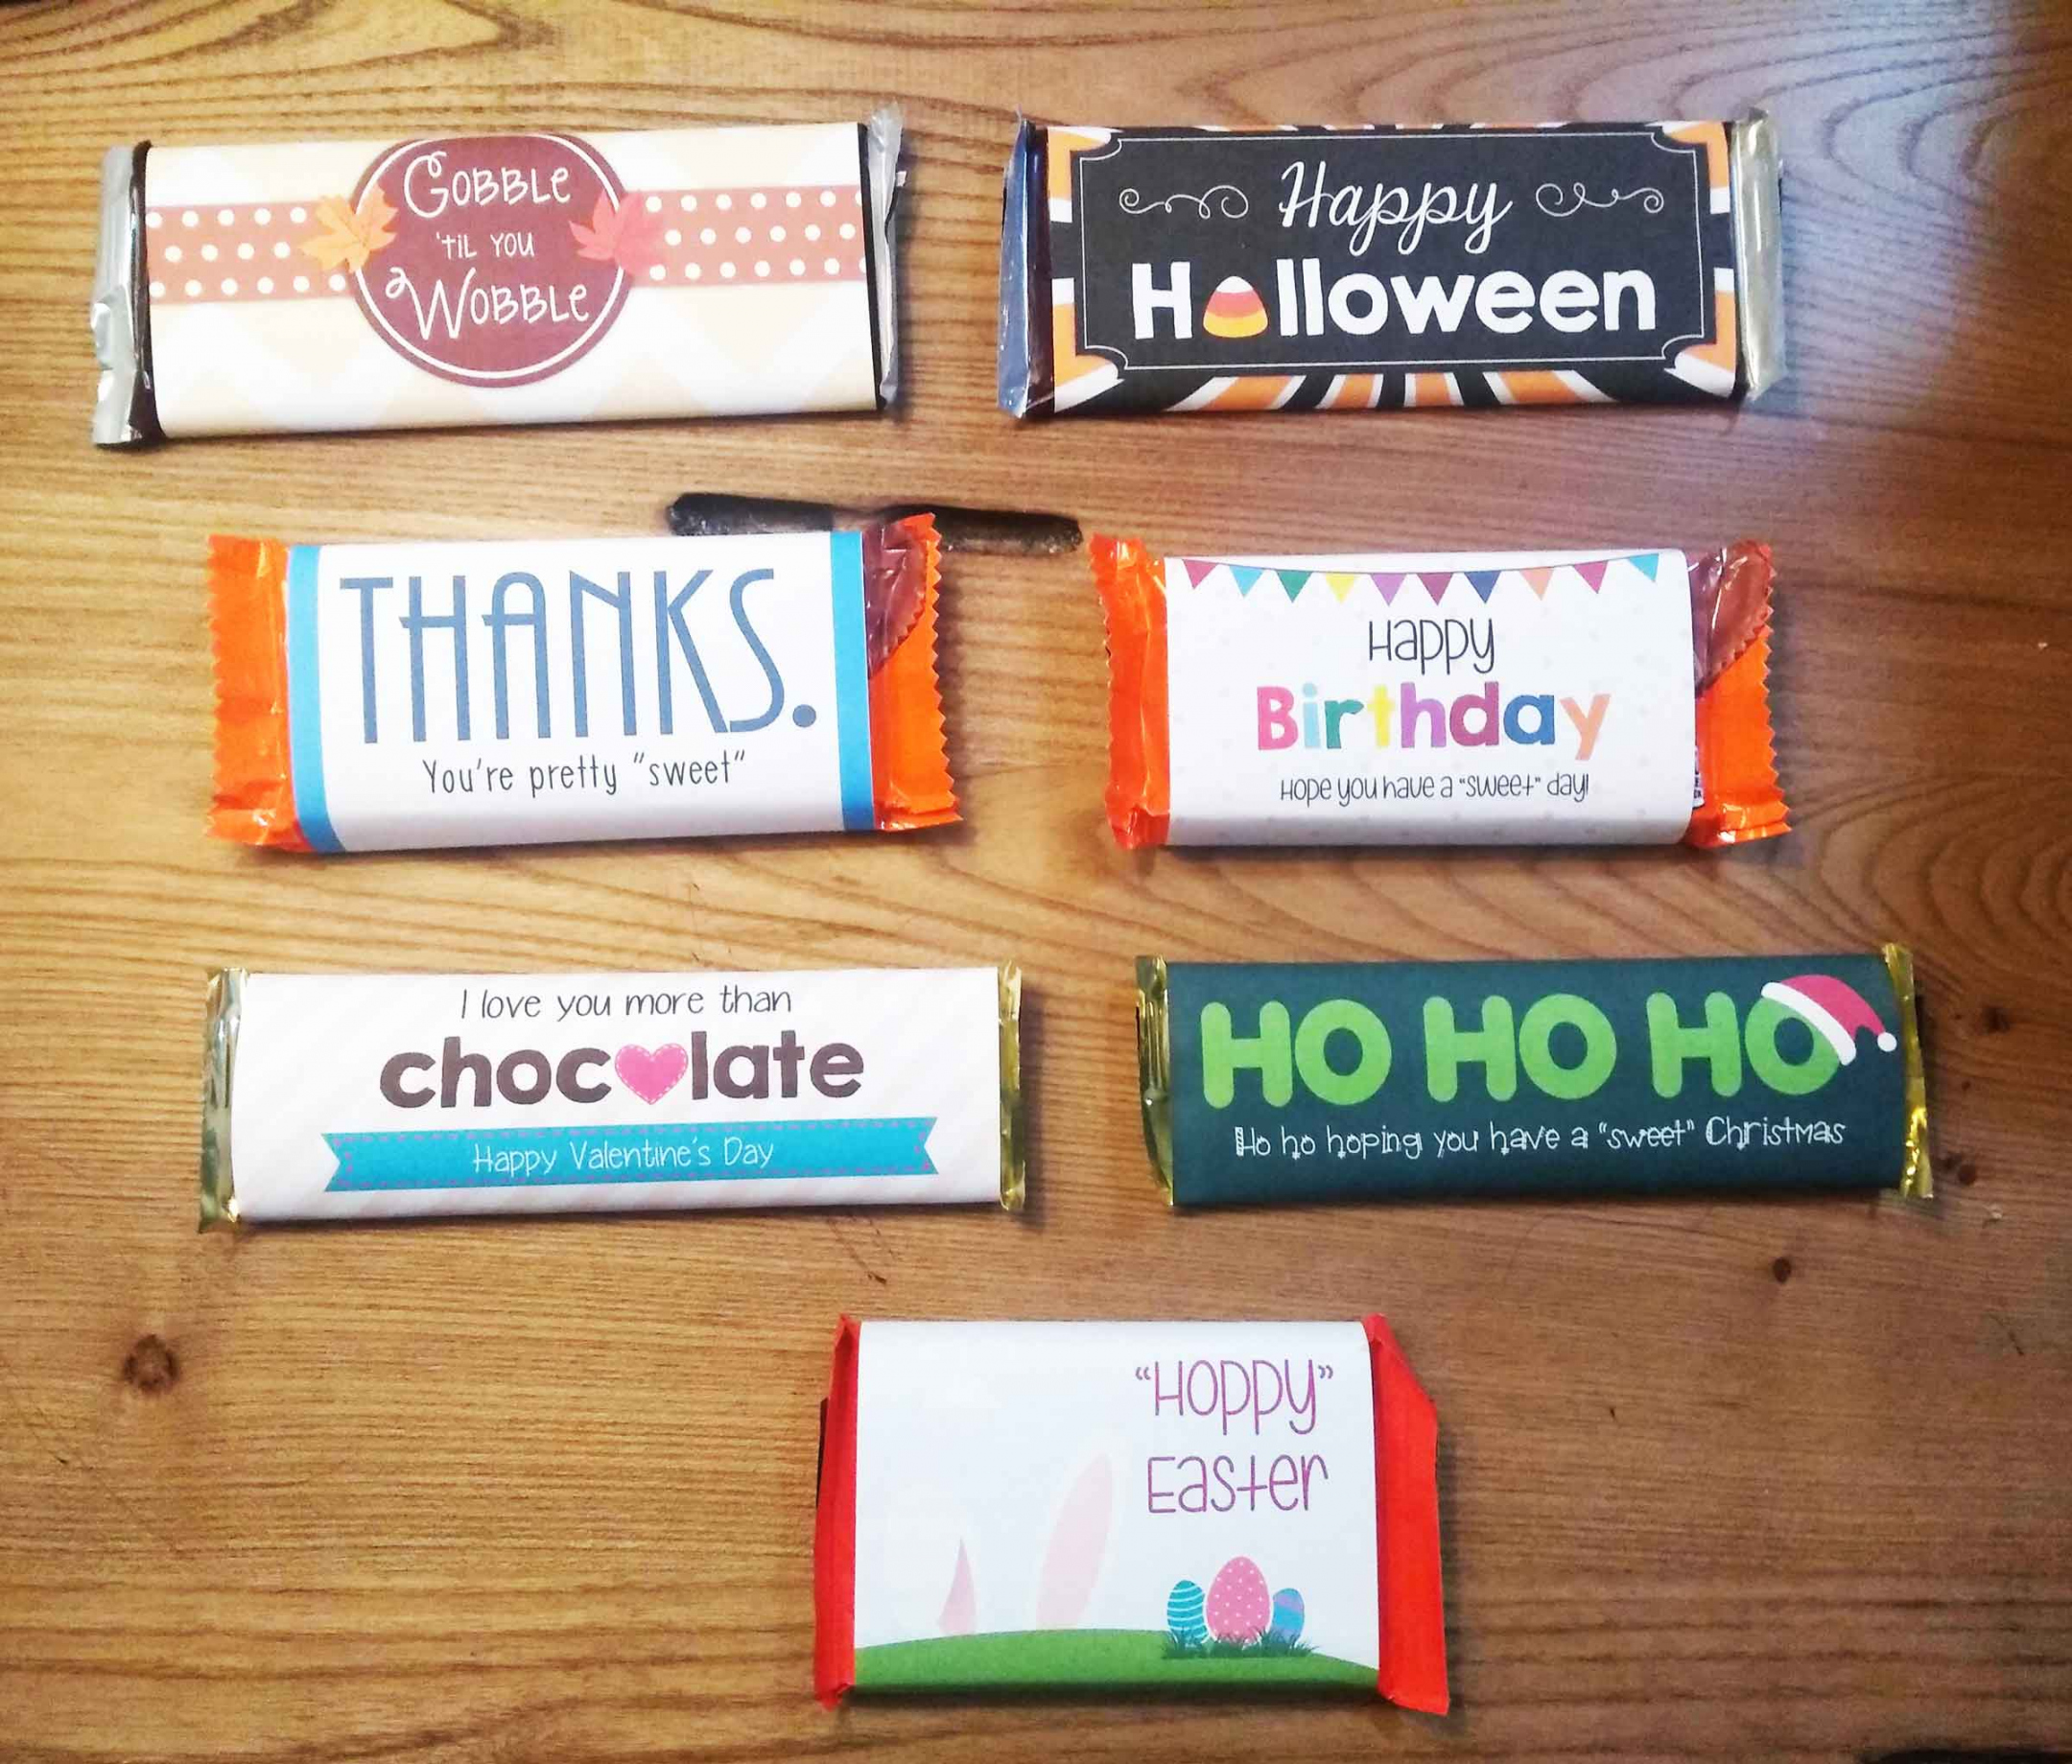 Seven FREE candy bar wrappers for every occasion - My Silly Squirts - FREE Printables - Free Printable Candy Bar Wrappers